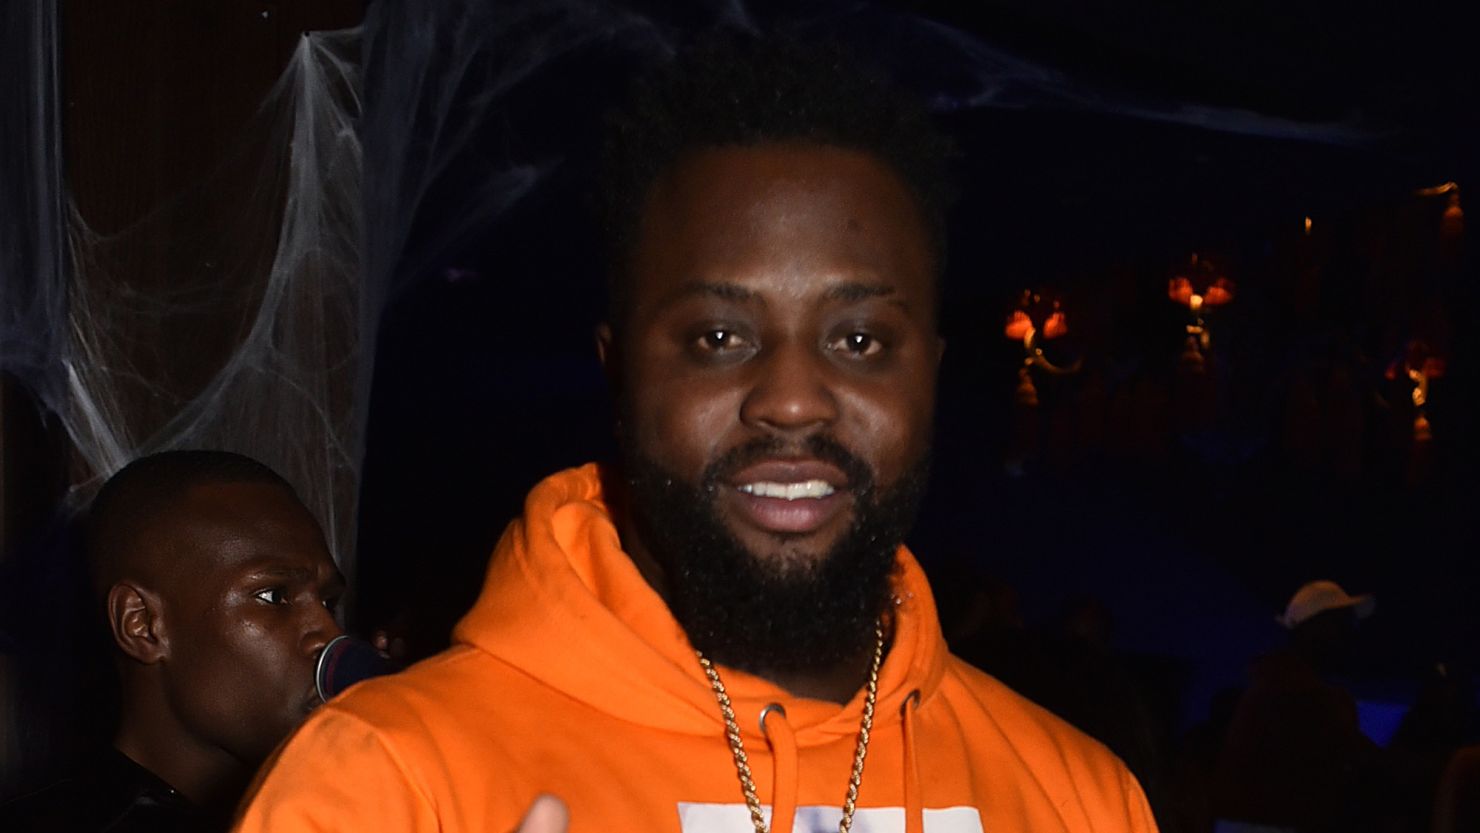 Cadet attends a Krept And Konan gig after-party on October 25, 2018 in London.